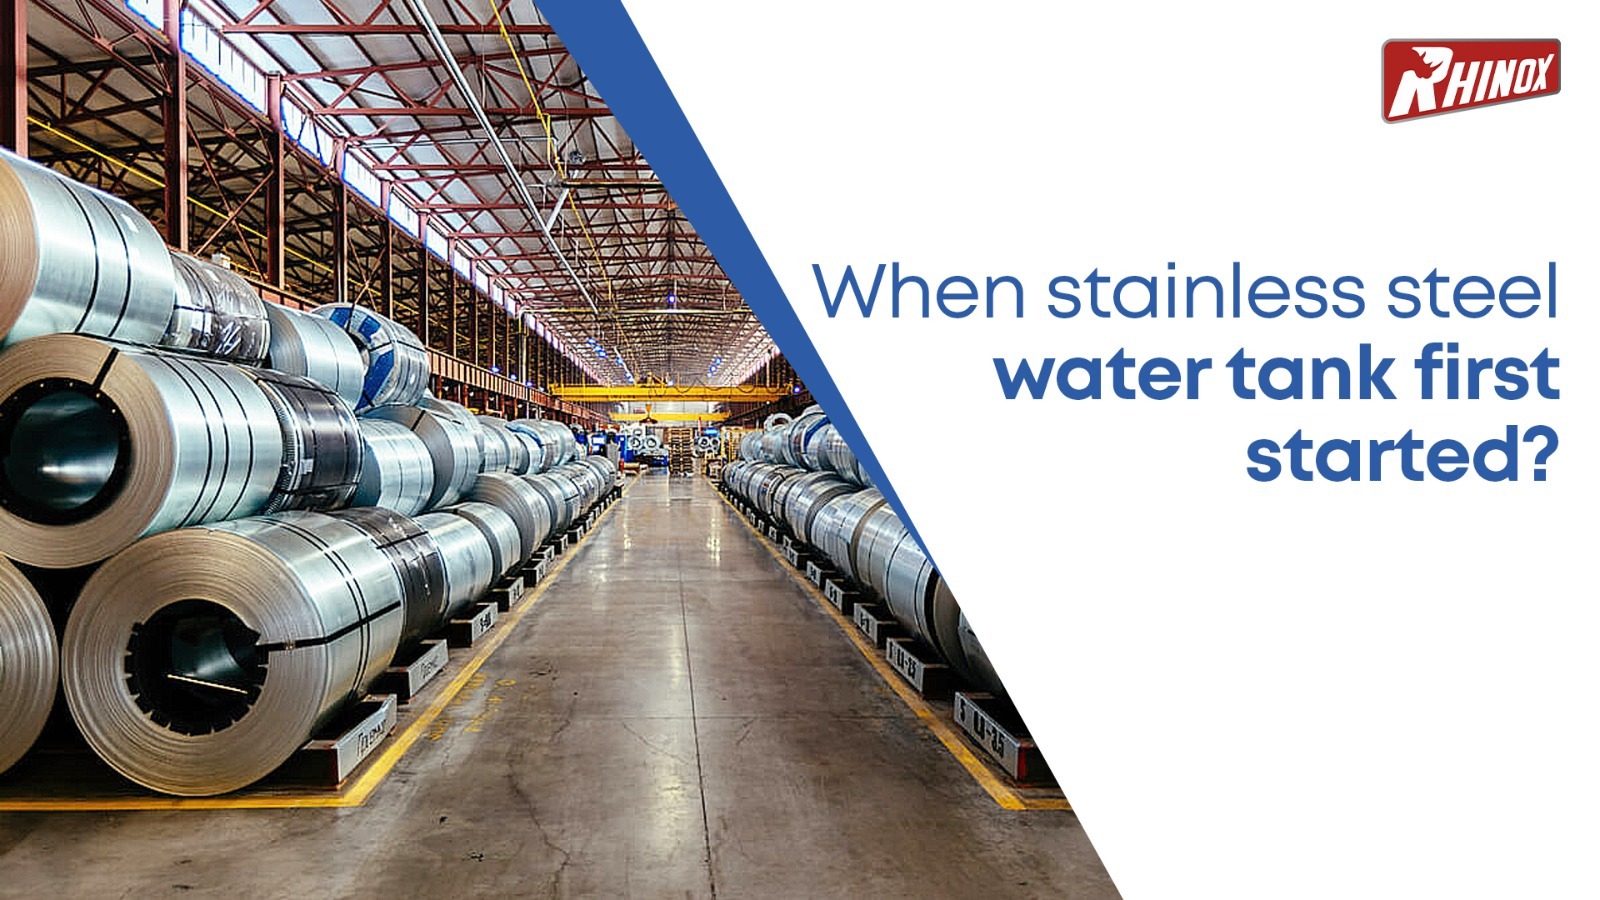 When stainless steel water tank first started?